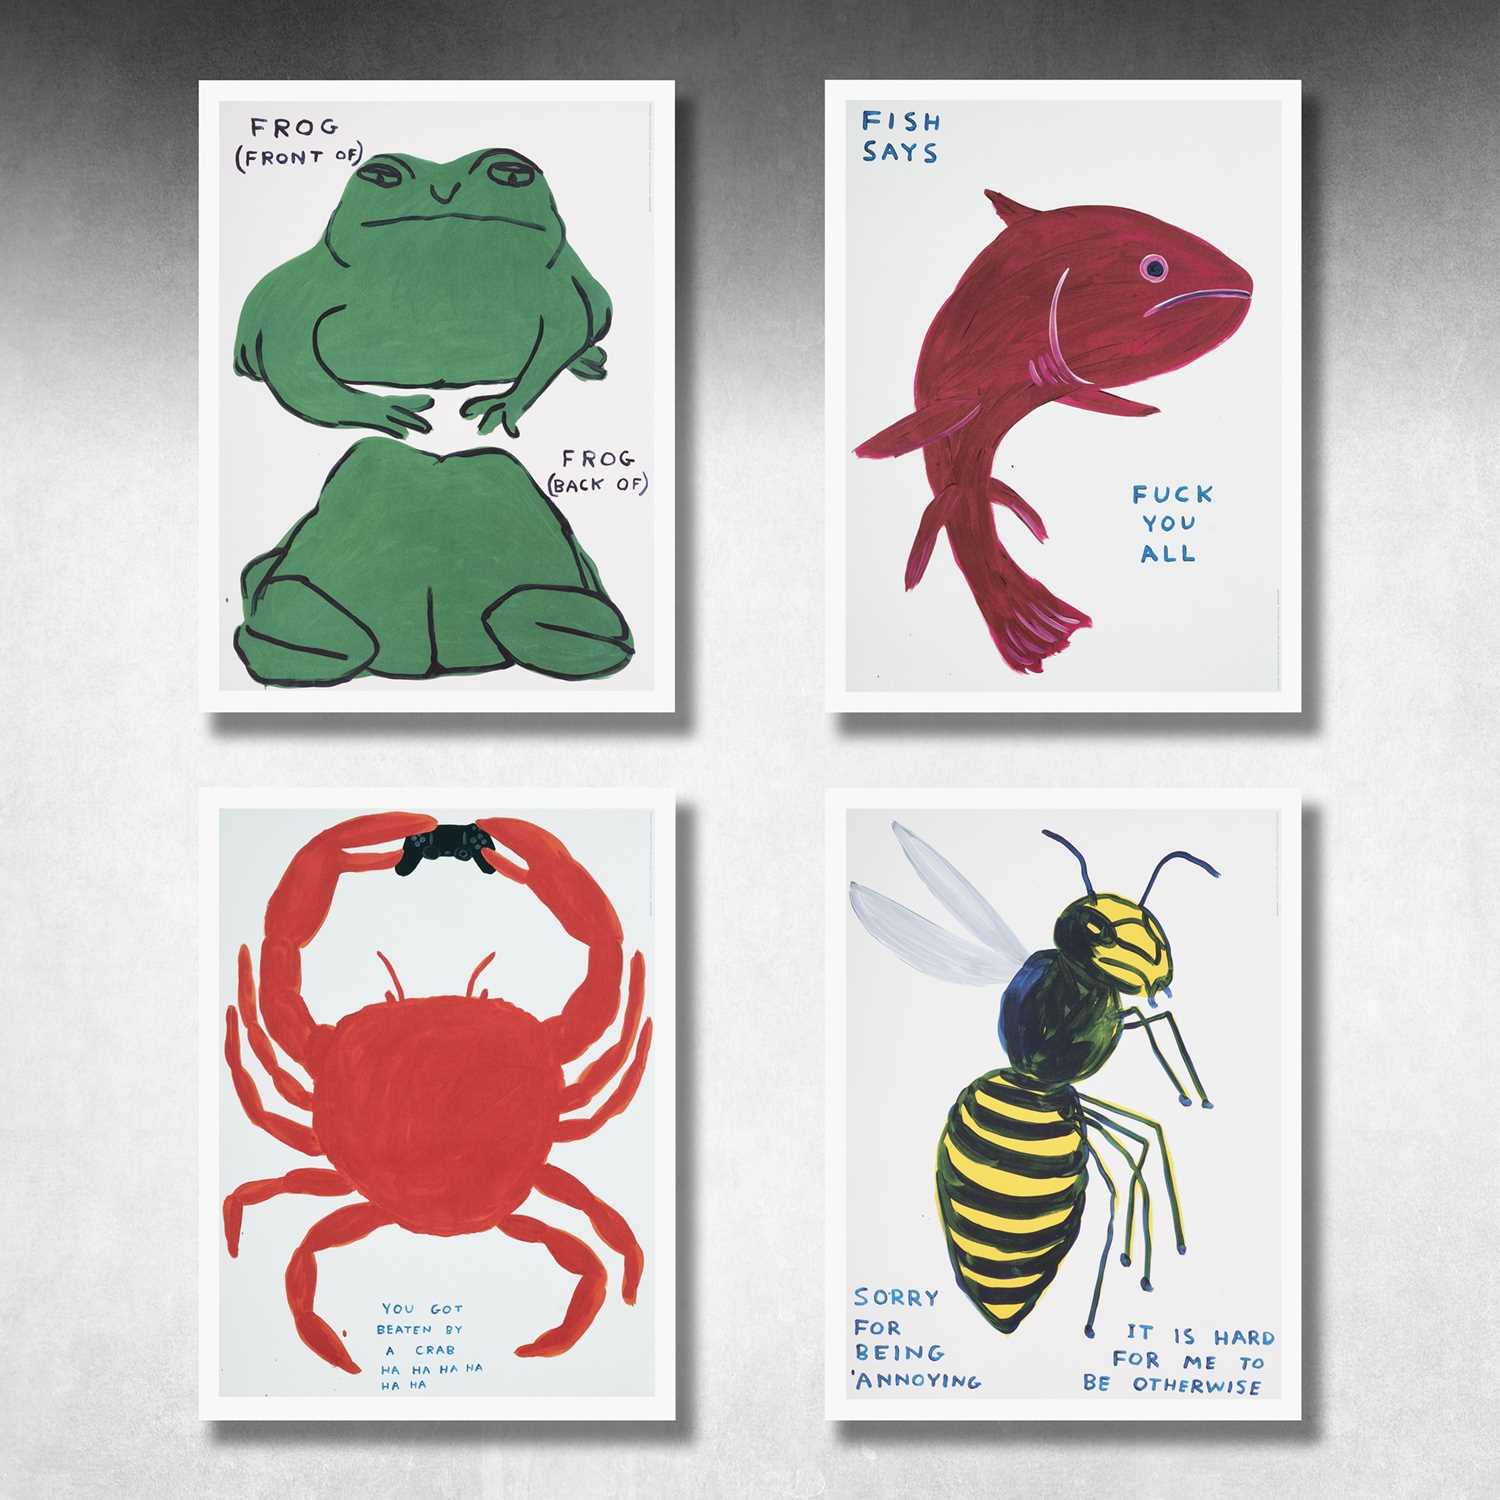 Lot 43 - David Shrigley (British 1968-), 'Fish Says Fuck You All, Frog (Front Of) Frog (Back Of), Sorry For Being Annoying & You Got Beaten By A Crab', 2022